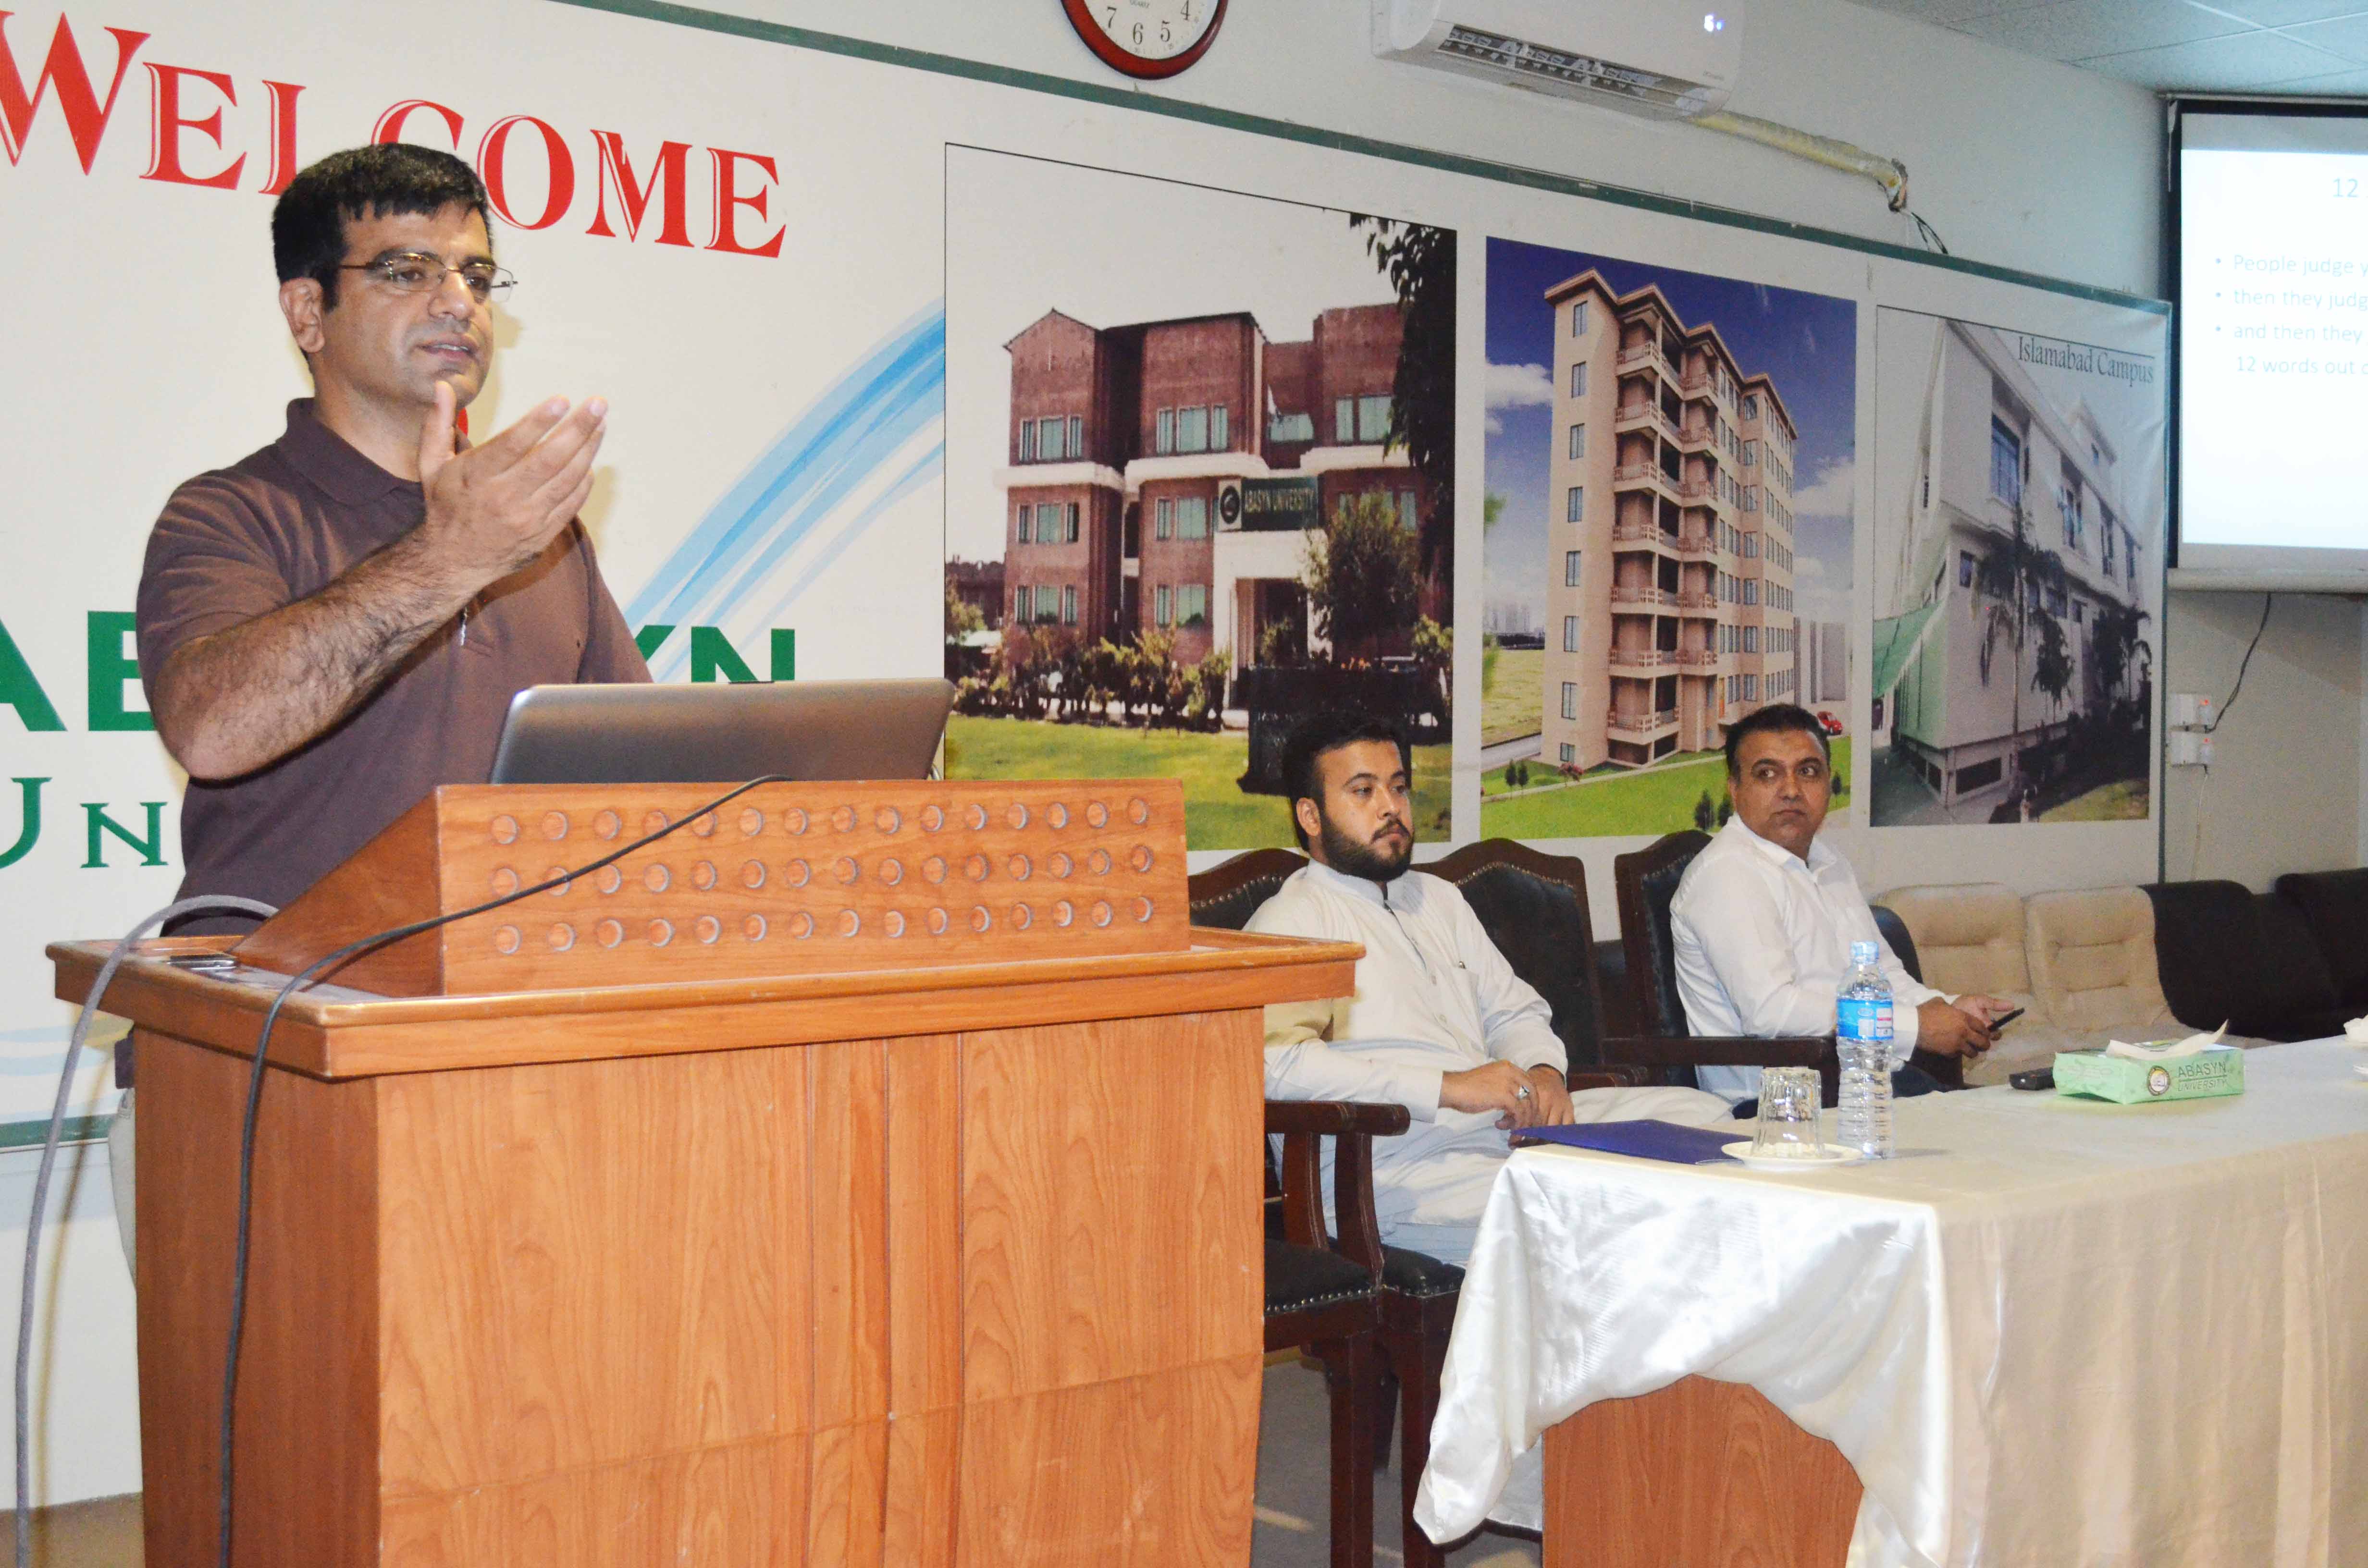 Workshop on career counseling